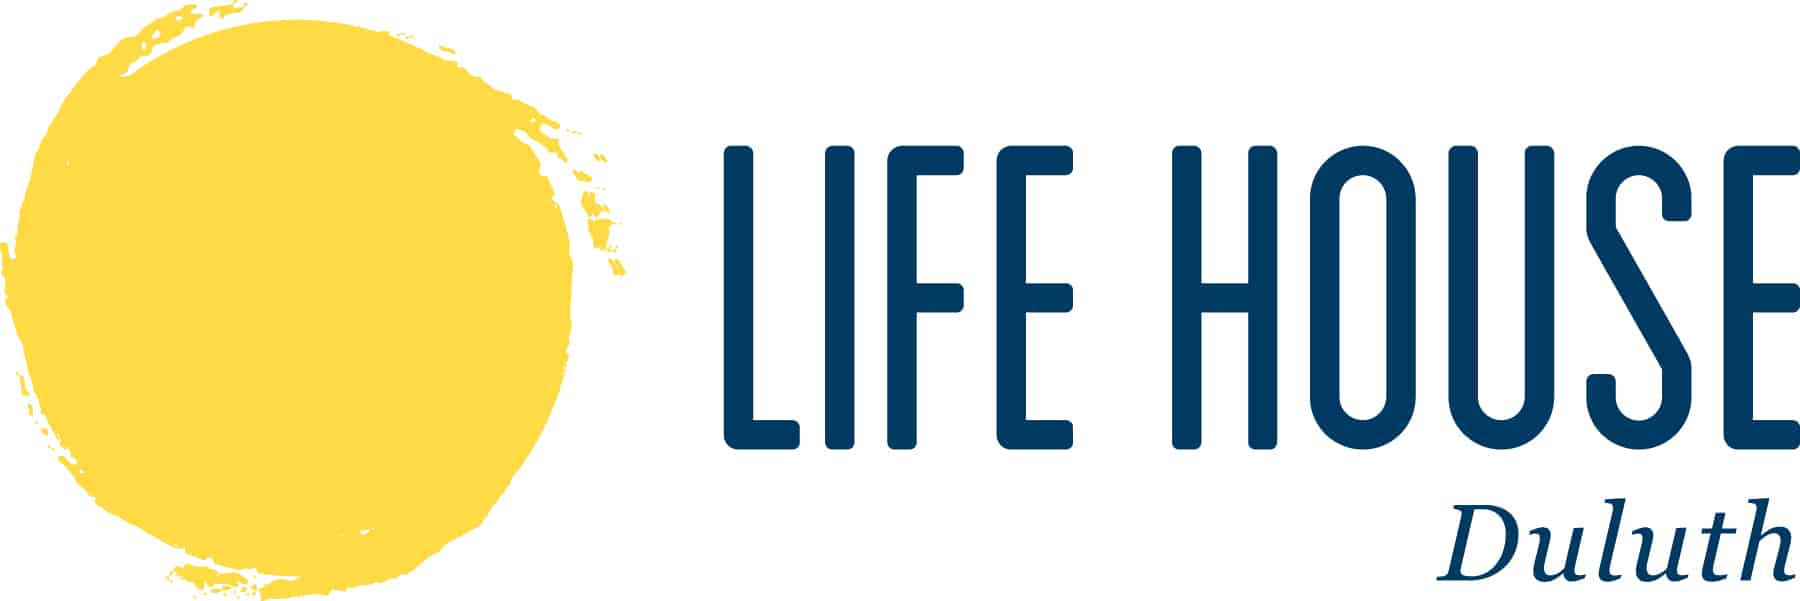 The image features the logo of "Life House Duluth." It consists of a large, imperfect yellow circle to the left and the words "LIFE HOUSE" in bold, uppercase letters to the right. The word "Duluth" is written below in a smaller, italicized font.